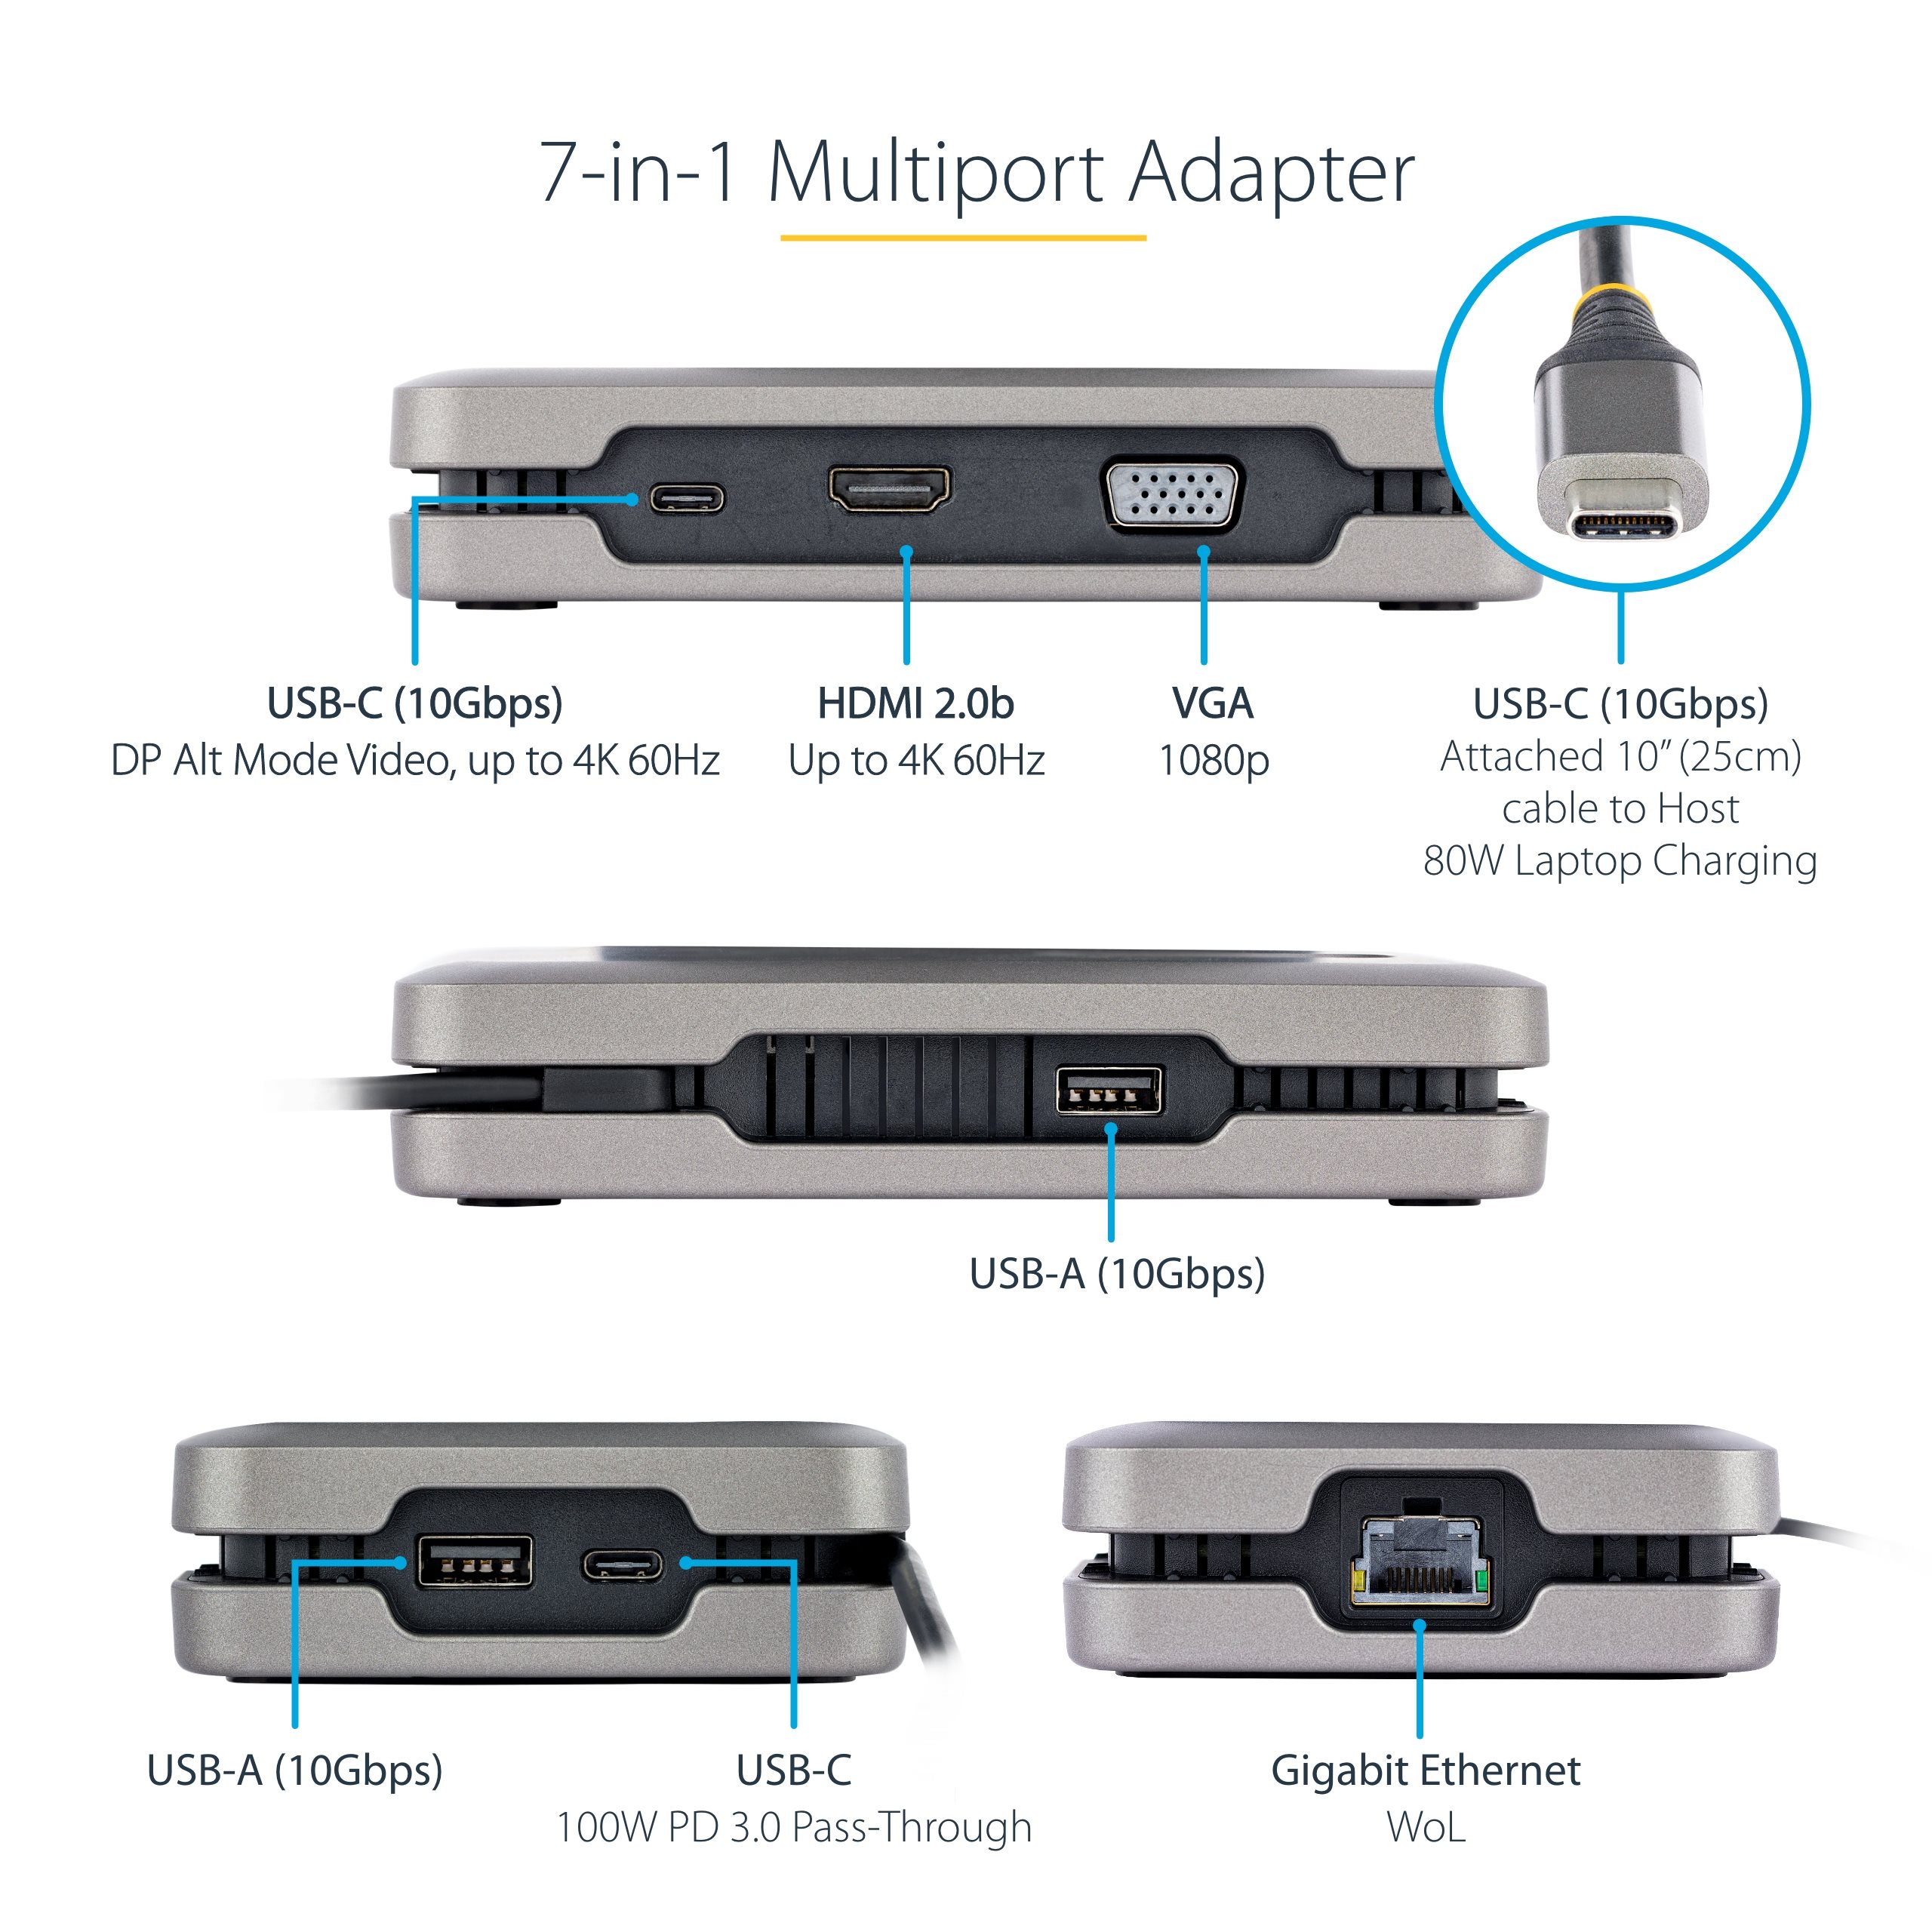 USB C to HDMI Multiport Adapter with Charging Port, HDMI to USB C Hub  Adapter for Monitor to Laptop, USB-C to USB 3.0 Adapter 10Gbps, USBC HDMI